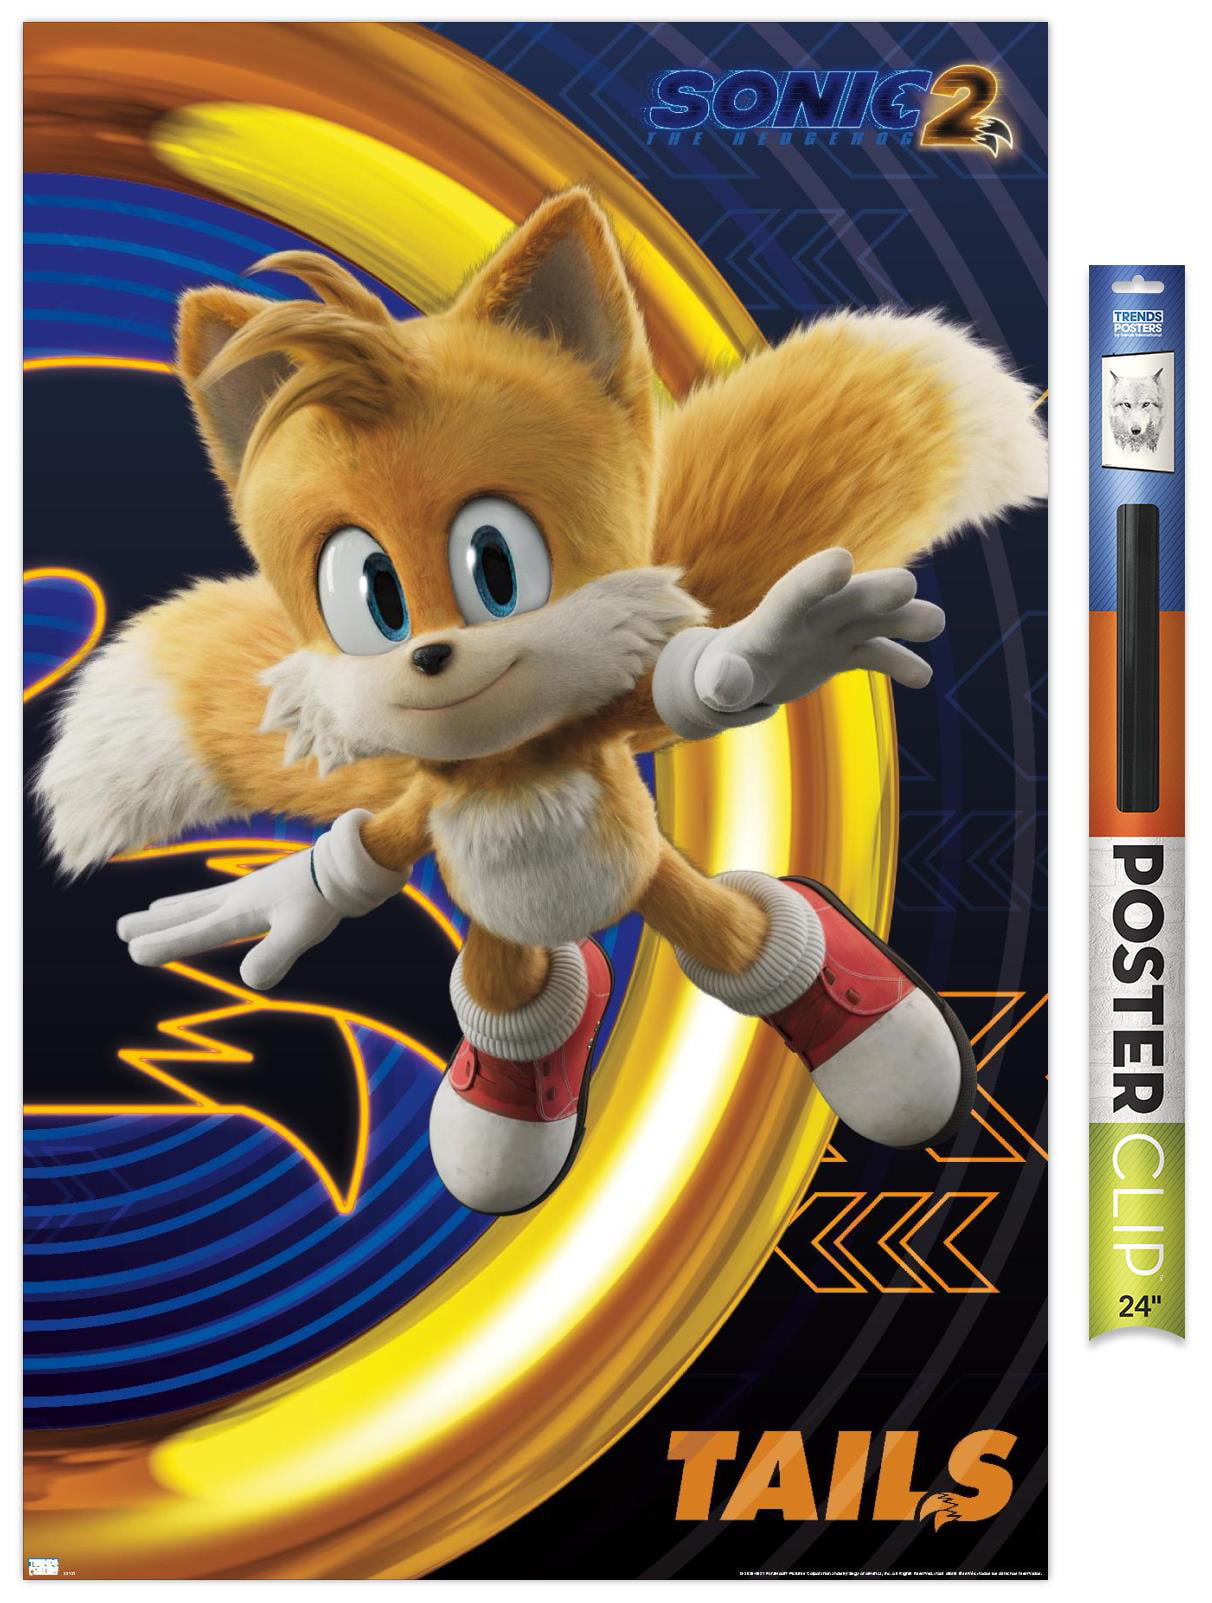 Sonic The Hedgehog 2 - Tails Wall Poster, 22.375 x 34 